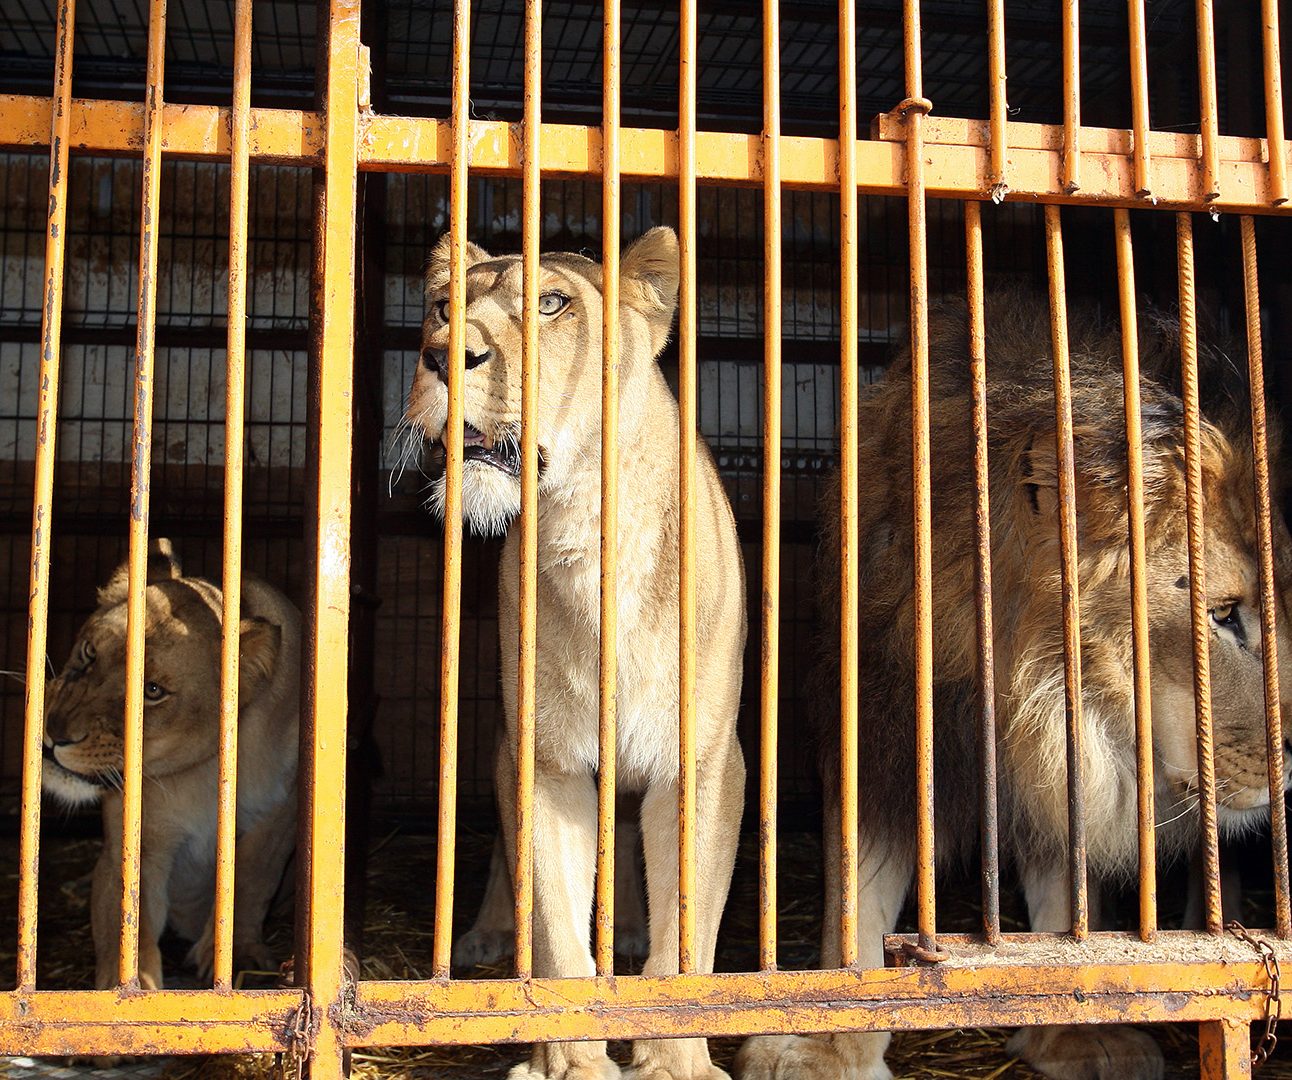 Three lions in a wooden wagon, before being rehomed at a Born Free Sanctuary